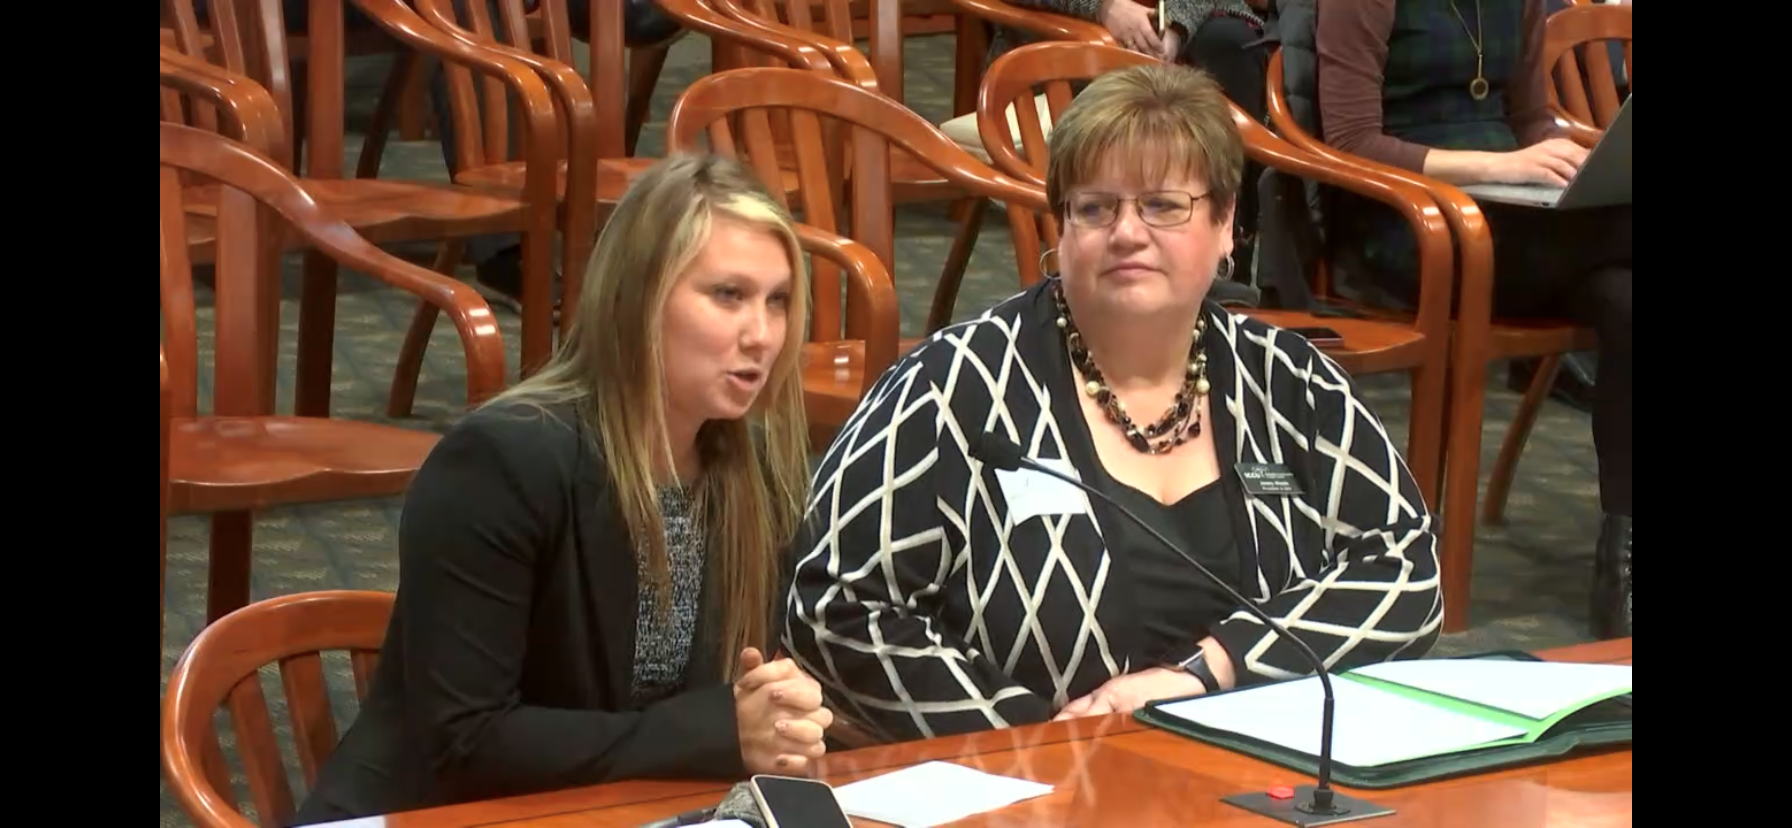 MCULÃ¢??s Director of State Advocacy, Haleigh Krombeen and Isabella Community Credit UnionÃ¢??s CEO, Jenny Hoyle testified in opposition to HB 4004 in the House Regulatory Reform Committee. 